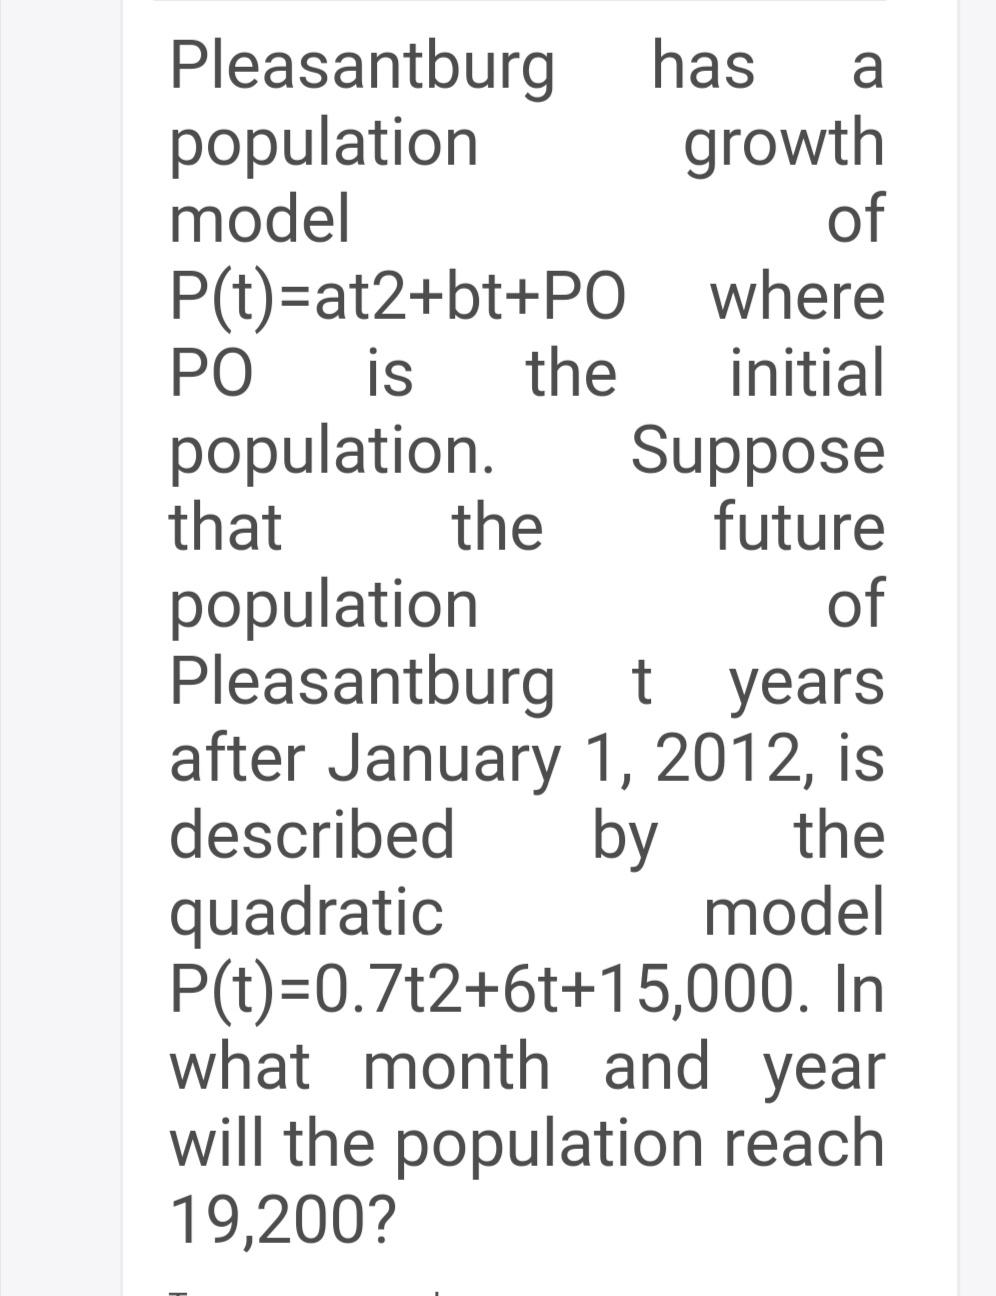 Pleasantburg
population
model
has
growth
of
P(t)=at2+bt+PO where
PO
is
the
initial
population.
that
Suppose
future
of
Pleasantburg t years
after January 1, 2012, is
the
model
the
population
described
by
quadratic
P(t)=0.7t2+6t+15,000. In
what month and year
will the population reach
19,200?
